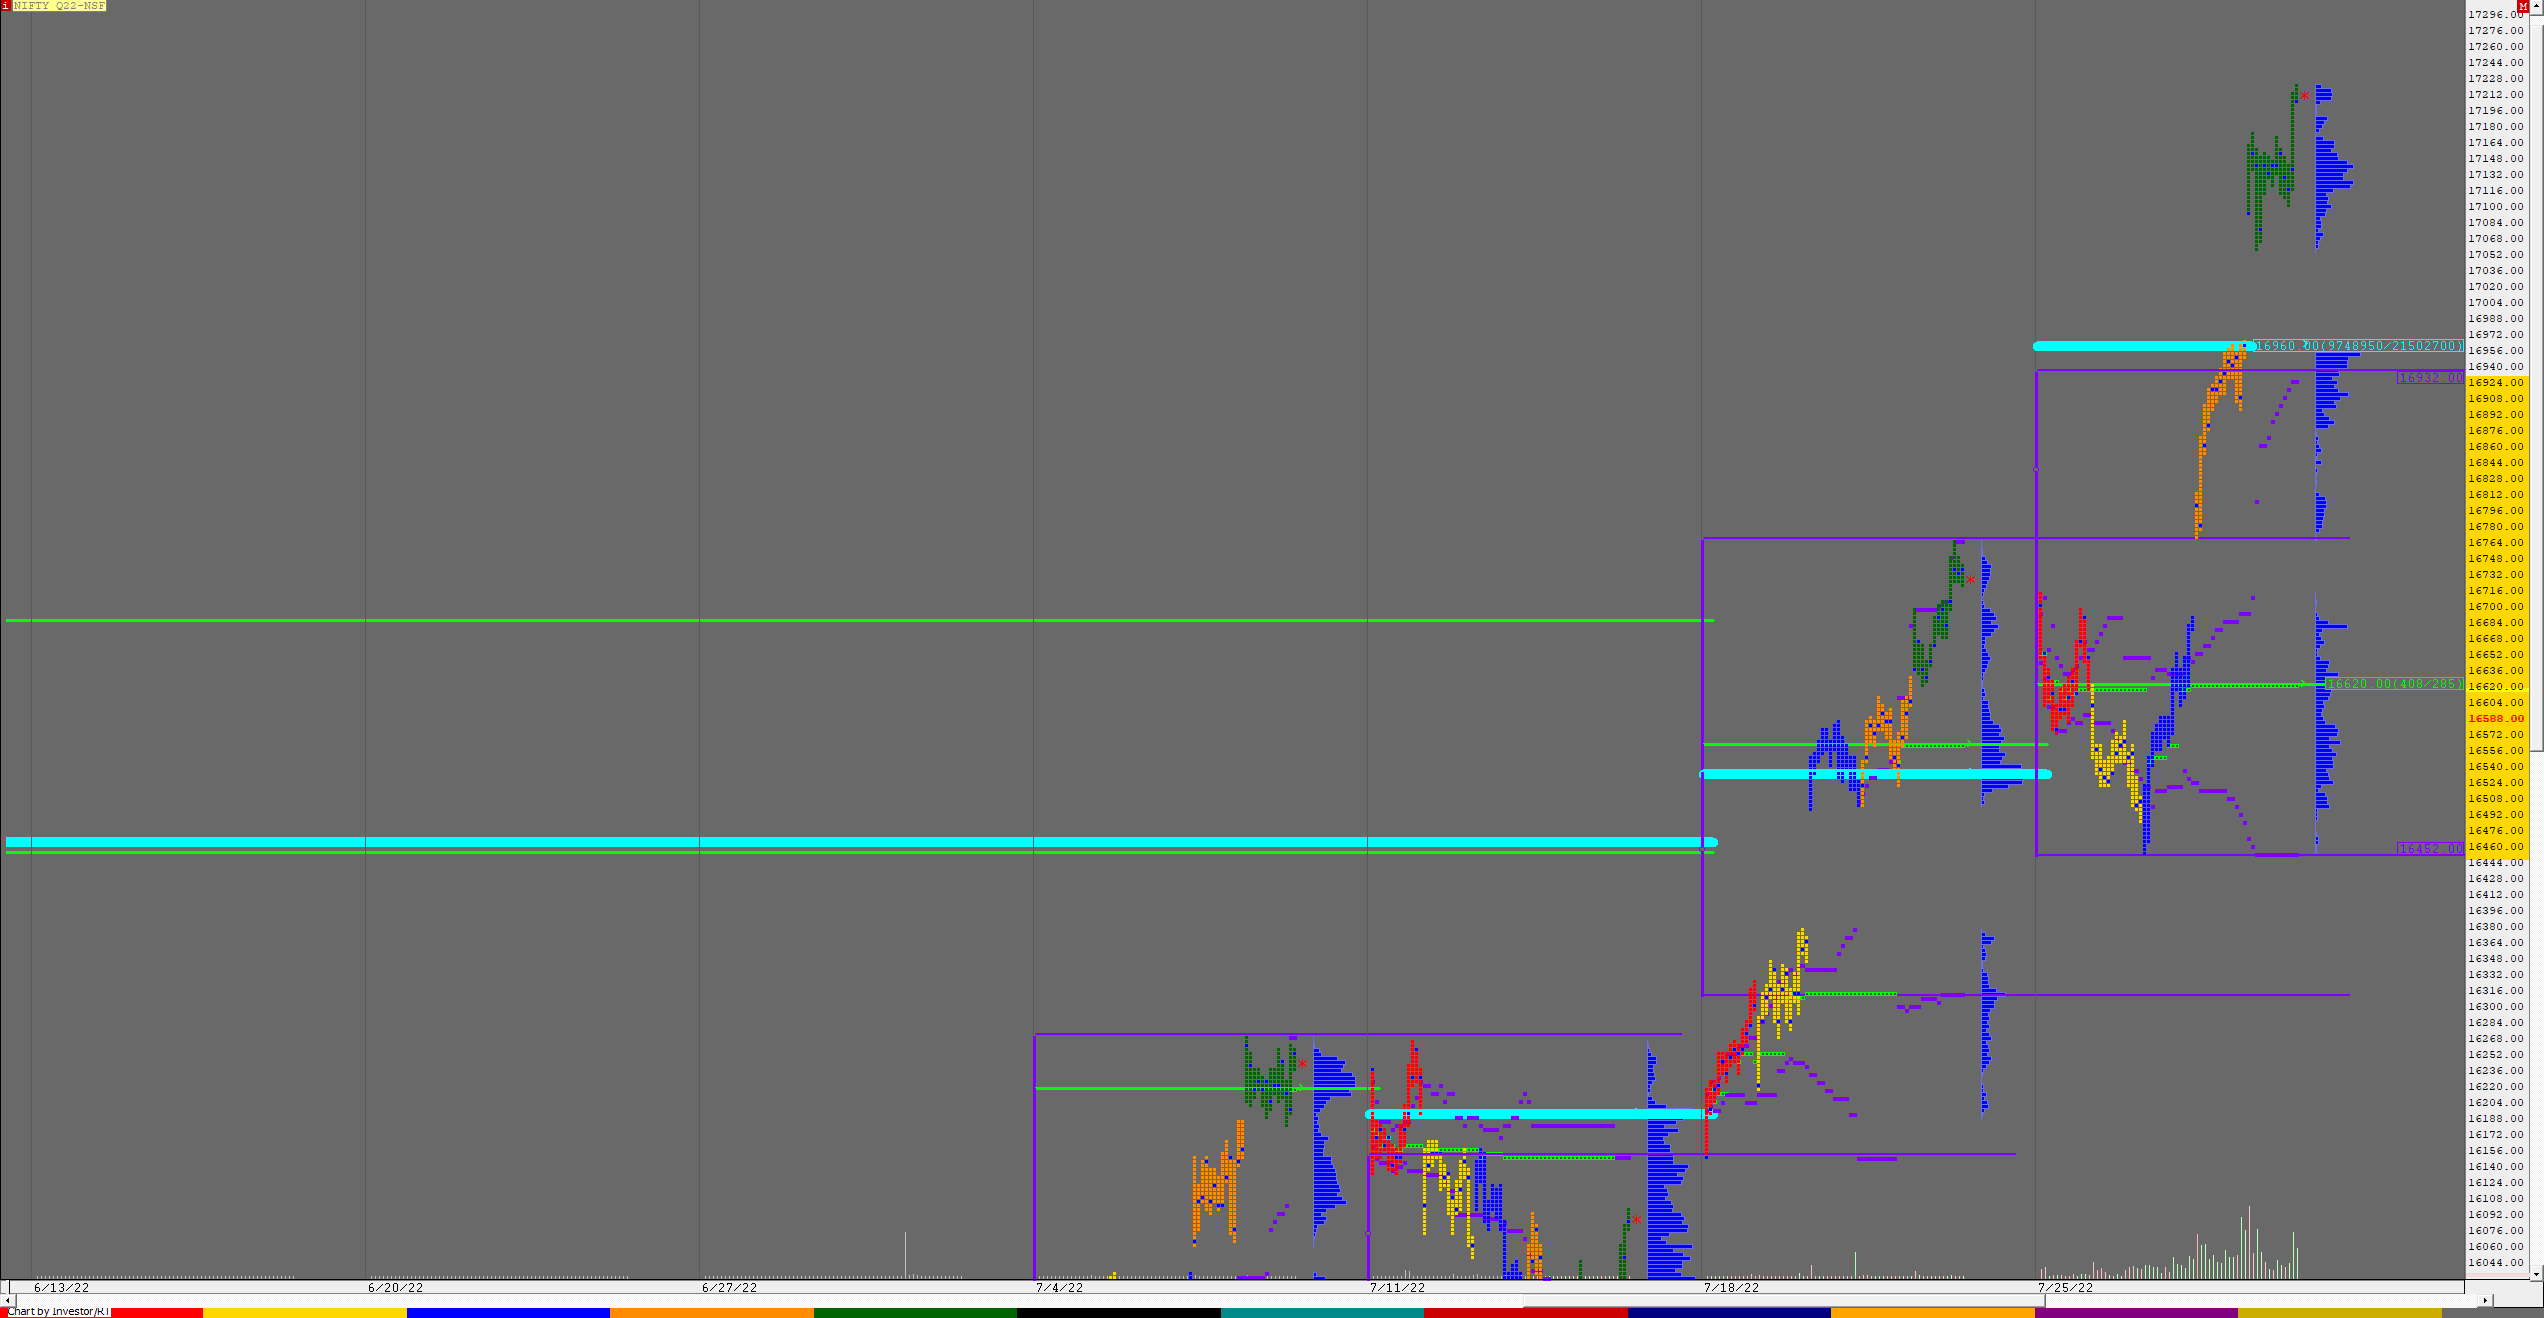 Nf F 3 Weekly Charts (25Th To 29Th Jul 2022) And Market Profile Analysis Banknifty Futures, Charts, Day Trading, Intraday Trading, Intraday Trading Strategies, Market Profile, Market Profile Trading Strategies, Nifty Futures, Order Flow Analysis, Support And Resistance, Technical Analysis, Trading Strategies, Volume Profile Trading